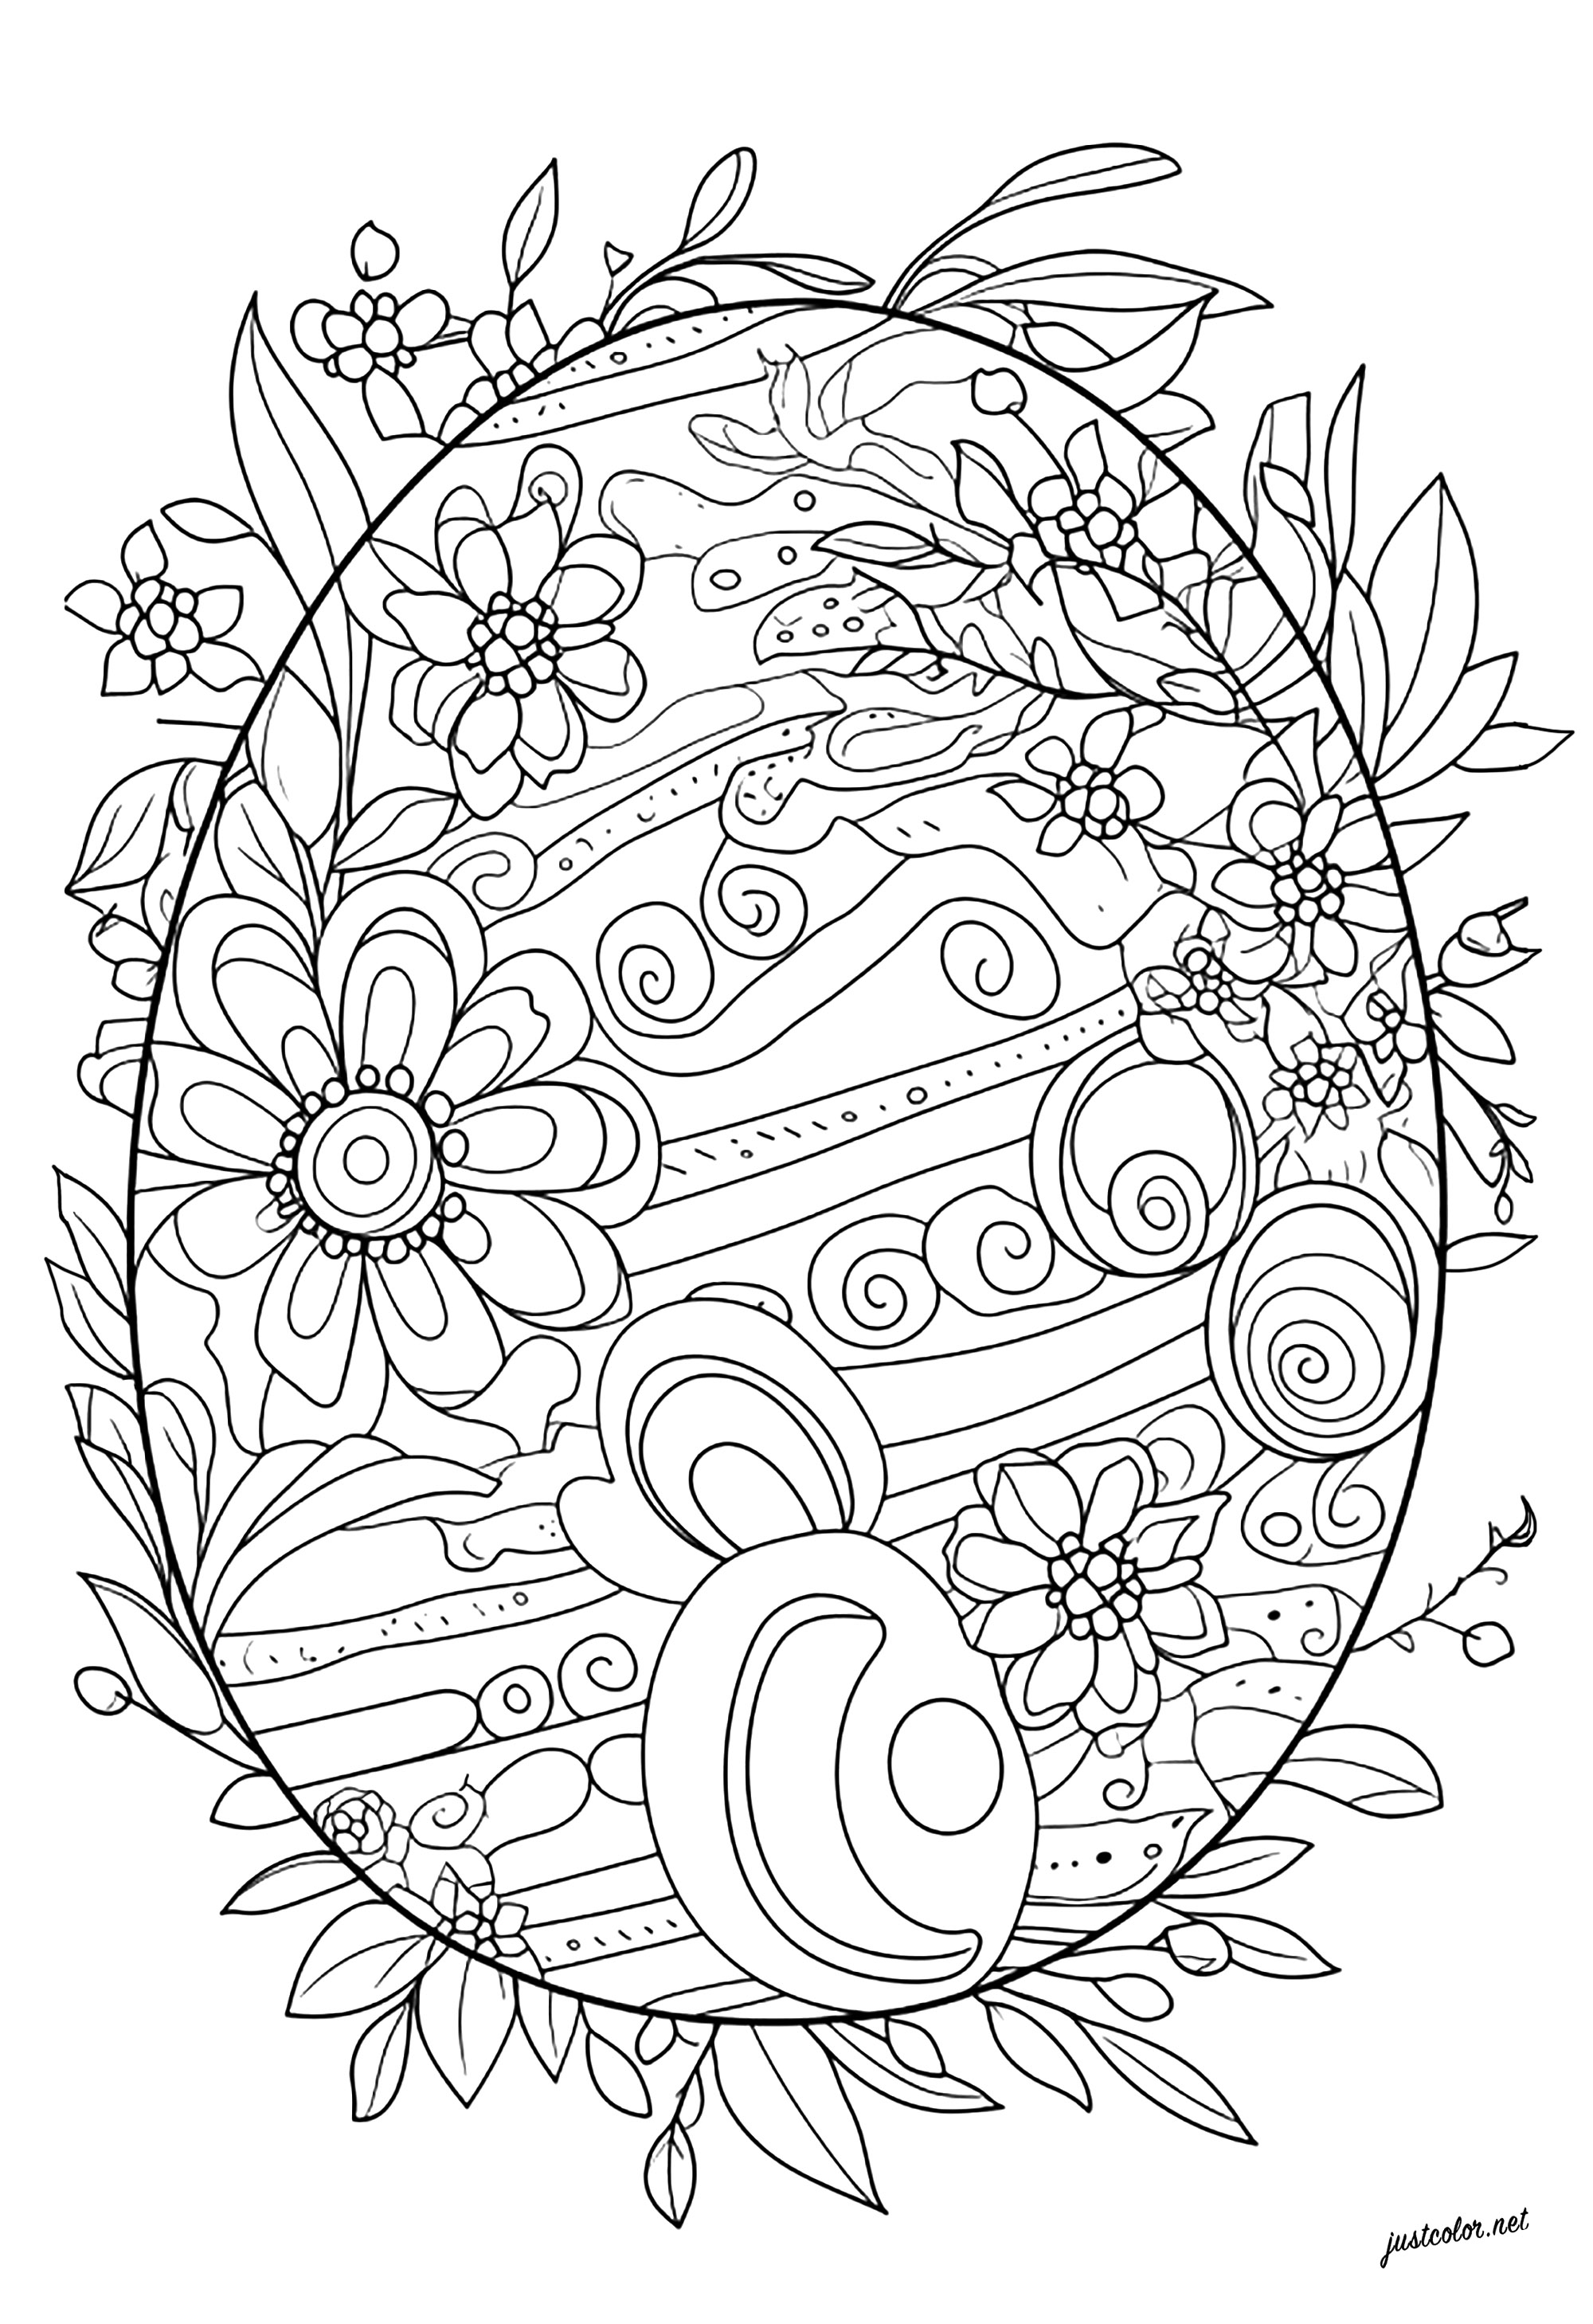 Original coloring of an Easter egg. Color the floral and abstract patterns of this Easter egg